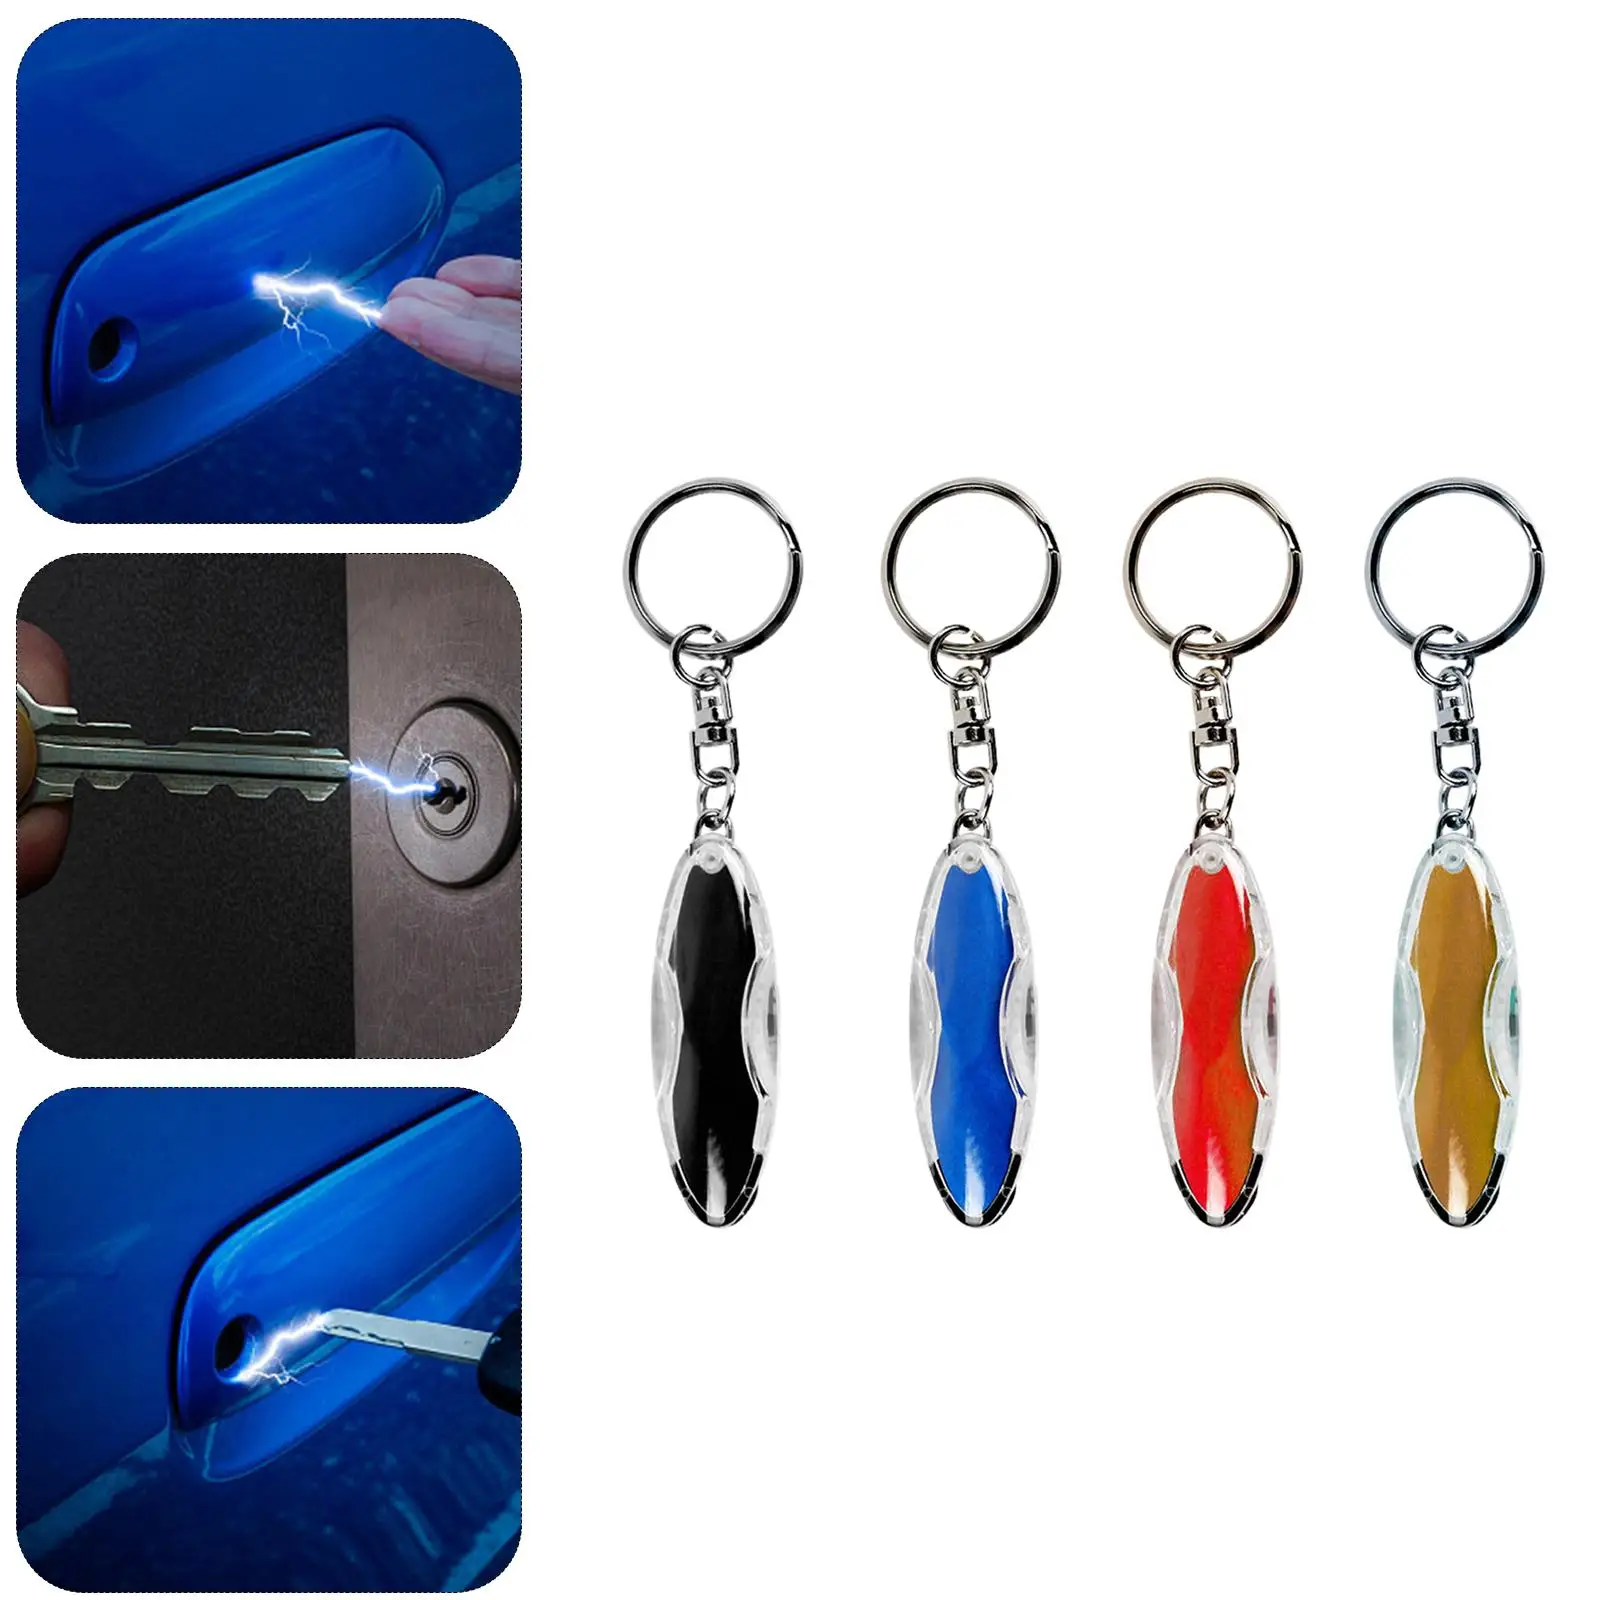 Portable Keychain Keyring Interior Accessory Tool Best Gifts Practical for Back